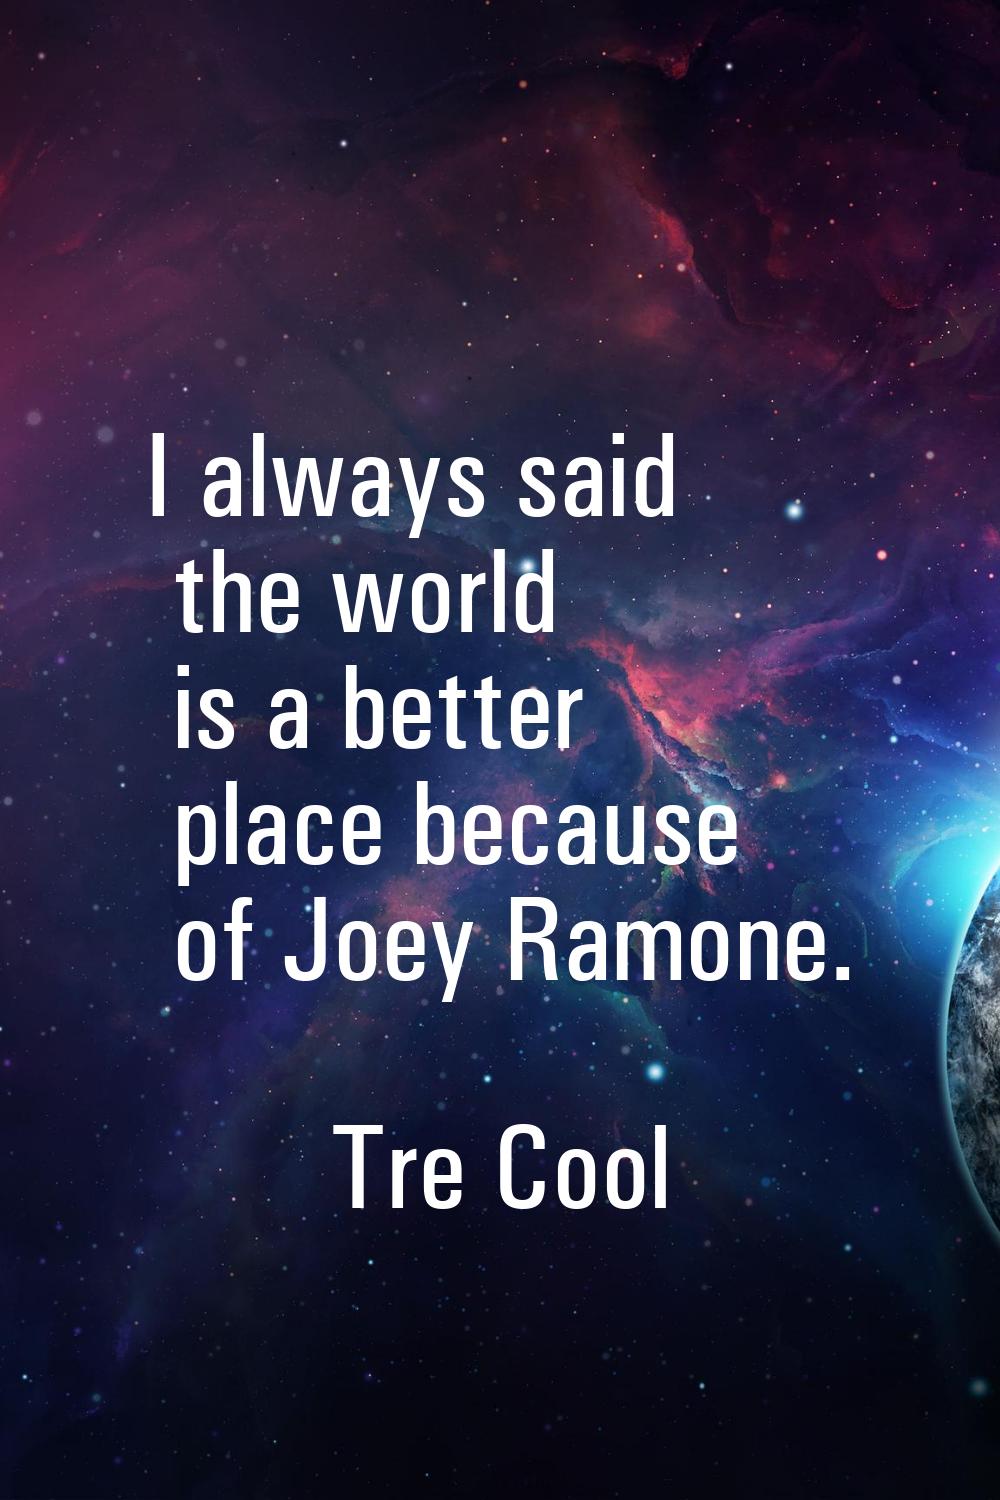 I always said the world is a better place because of Joey Ramone.